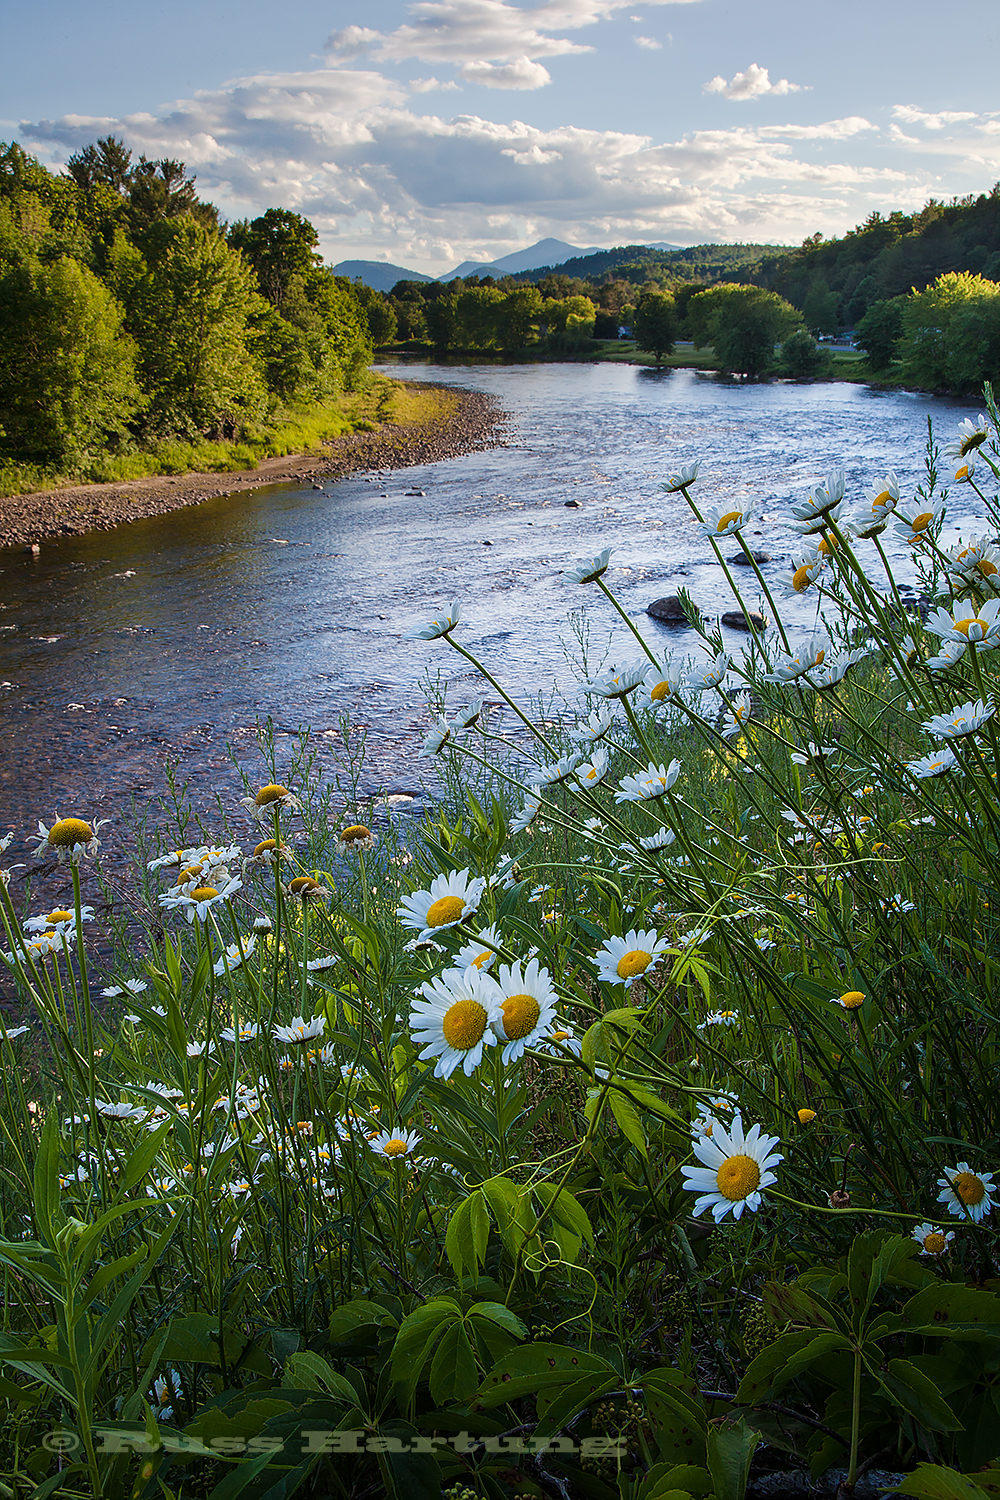 Daisies in bloom along the West Branch of the Ausable River near Ausable Forks. 